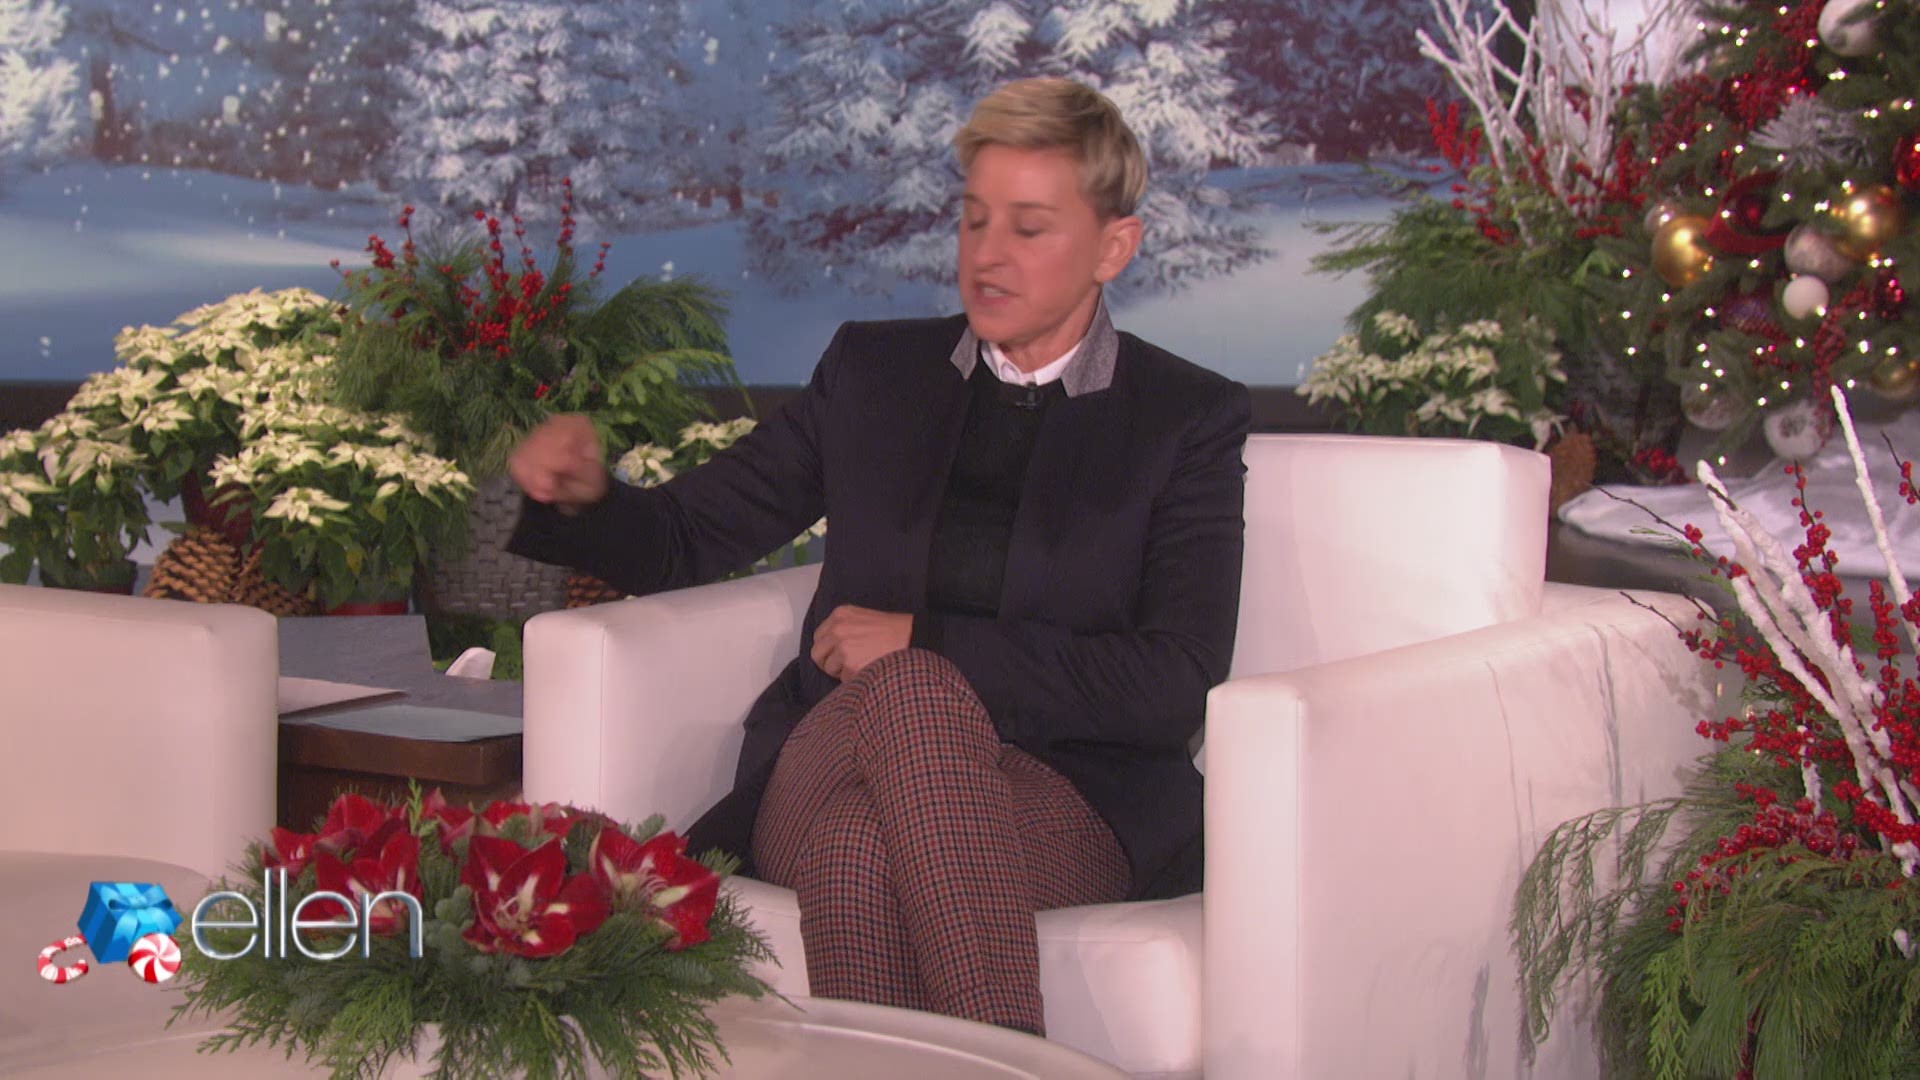 Ellen surprised a family from St. Charles